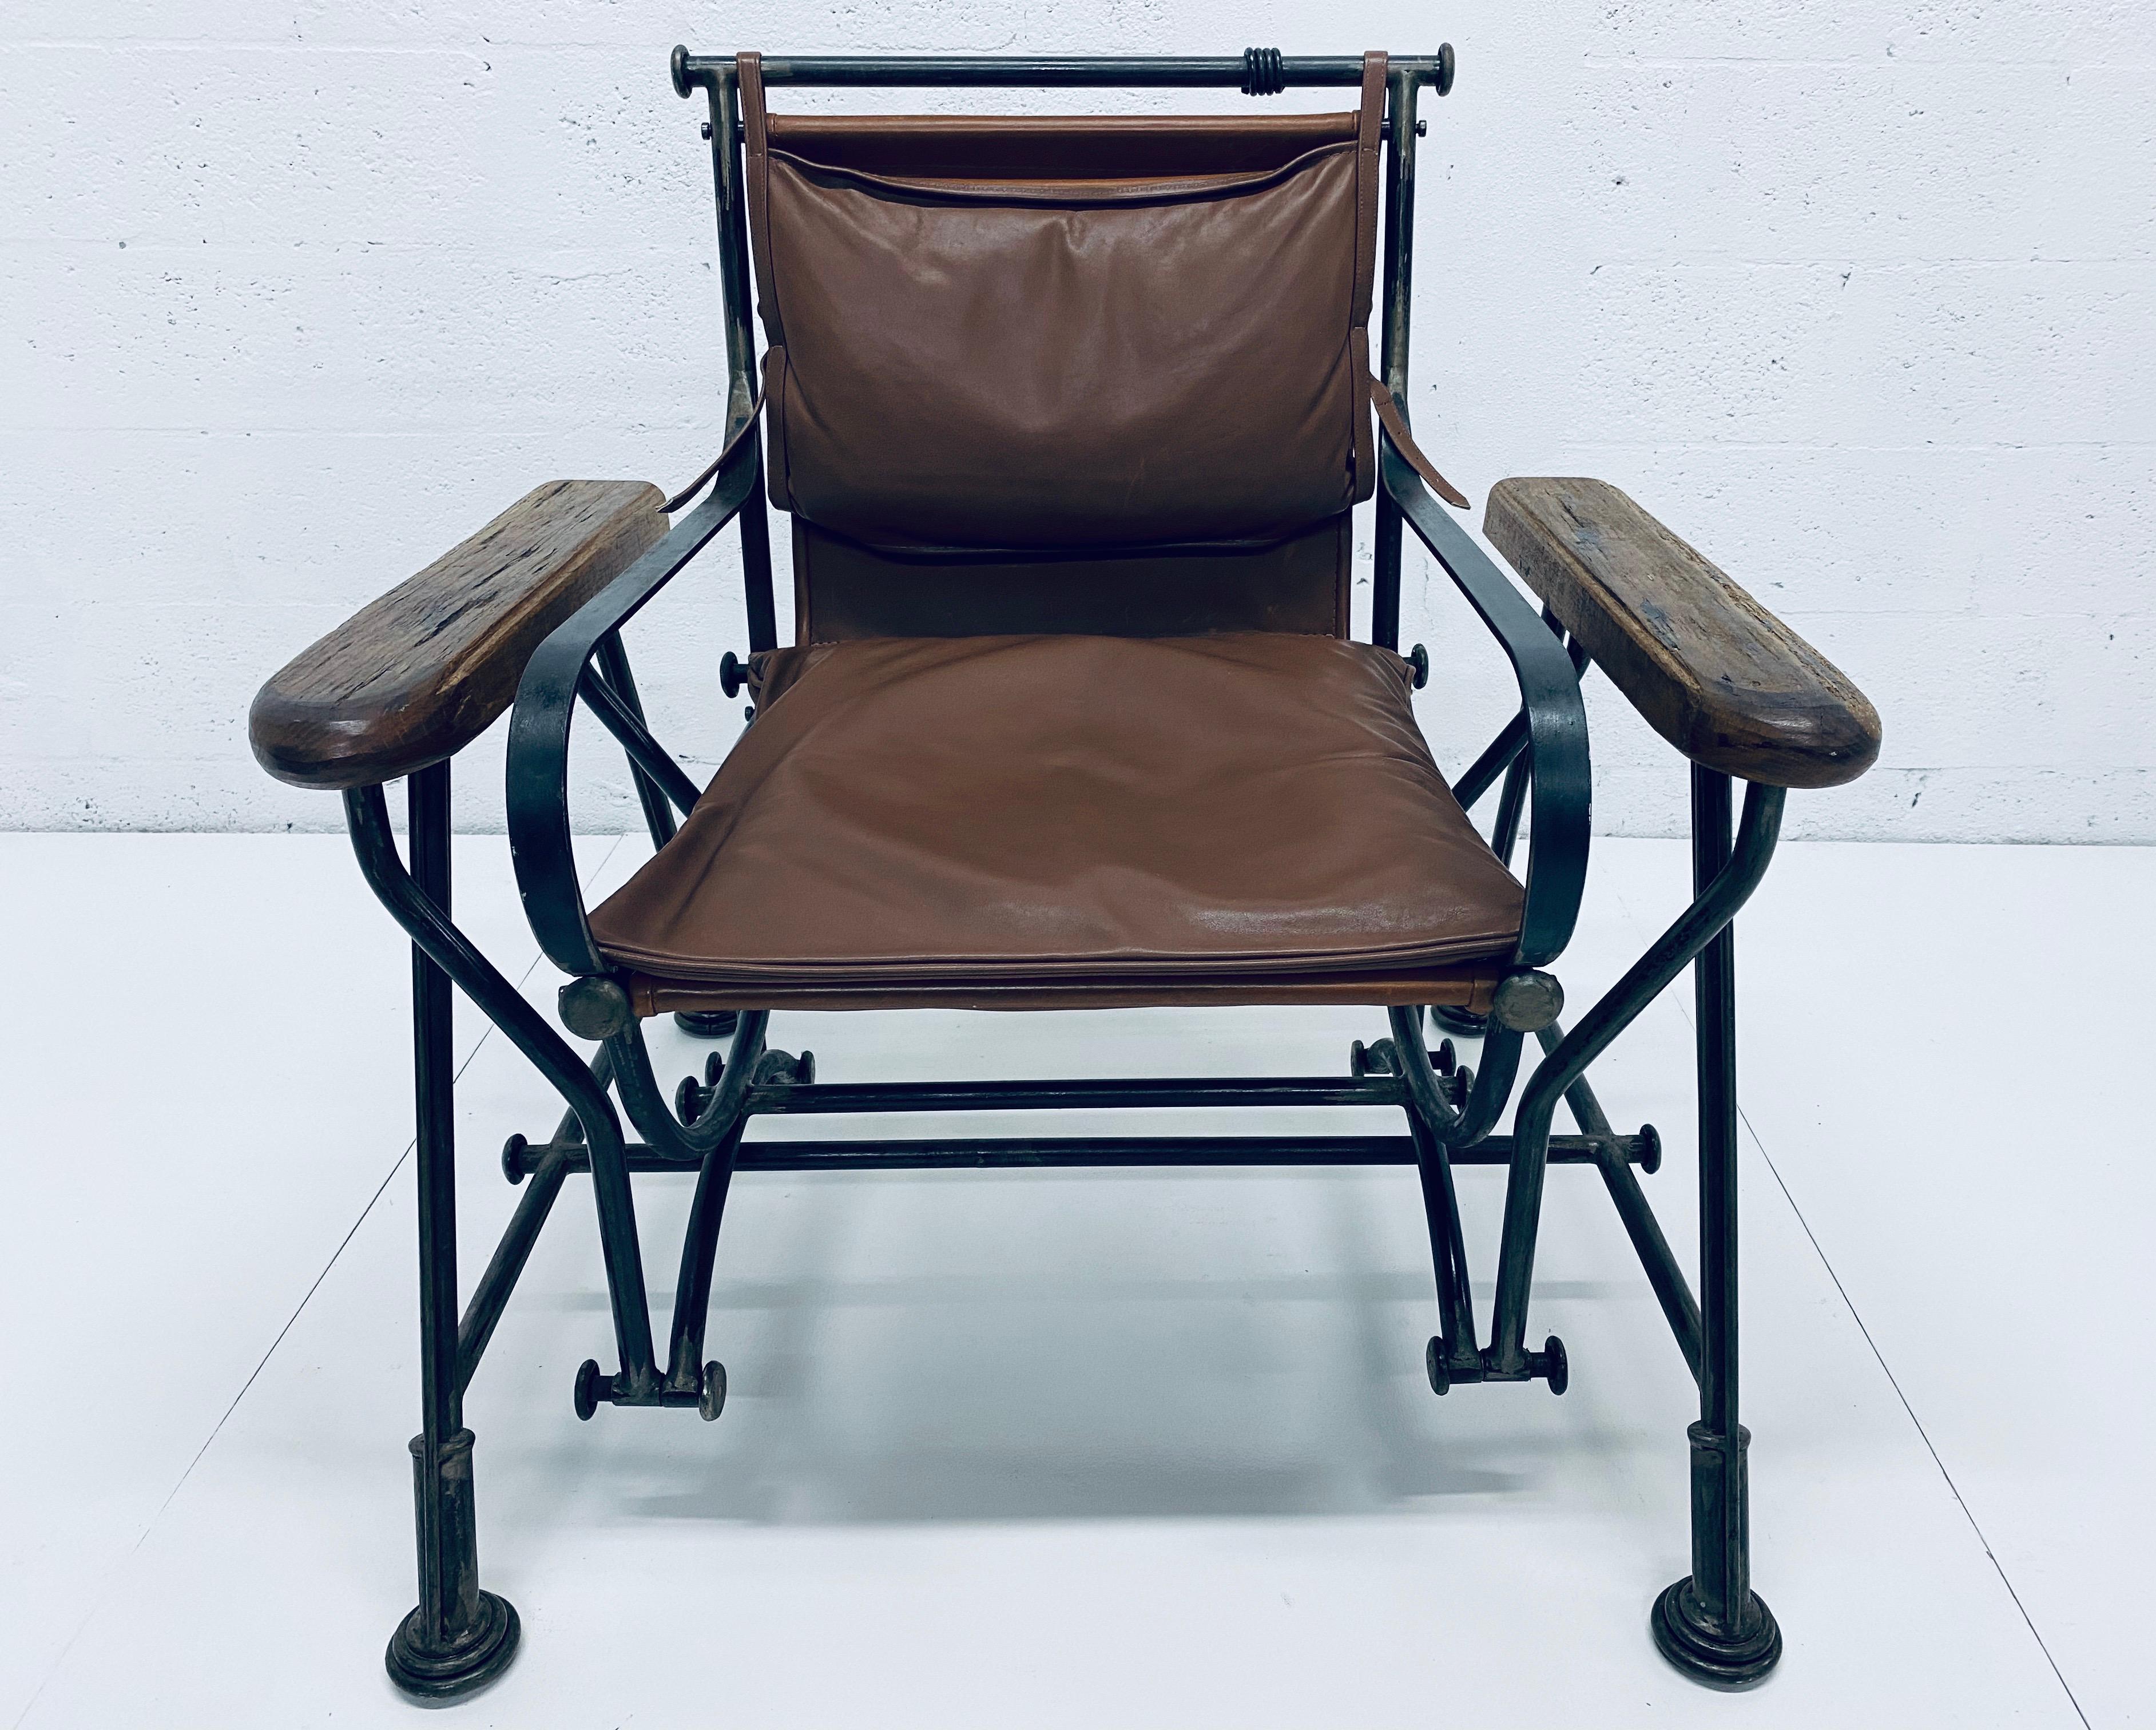 Rare and collectible Ilana Goor brown leather and iron glide (moves back and forth) arm chair. Signed.

Ilana Goor is an individualistic, autodidactic, intuitive and multifaceted artist. As an artist who knows no boundaries and whose art transcends